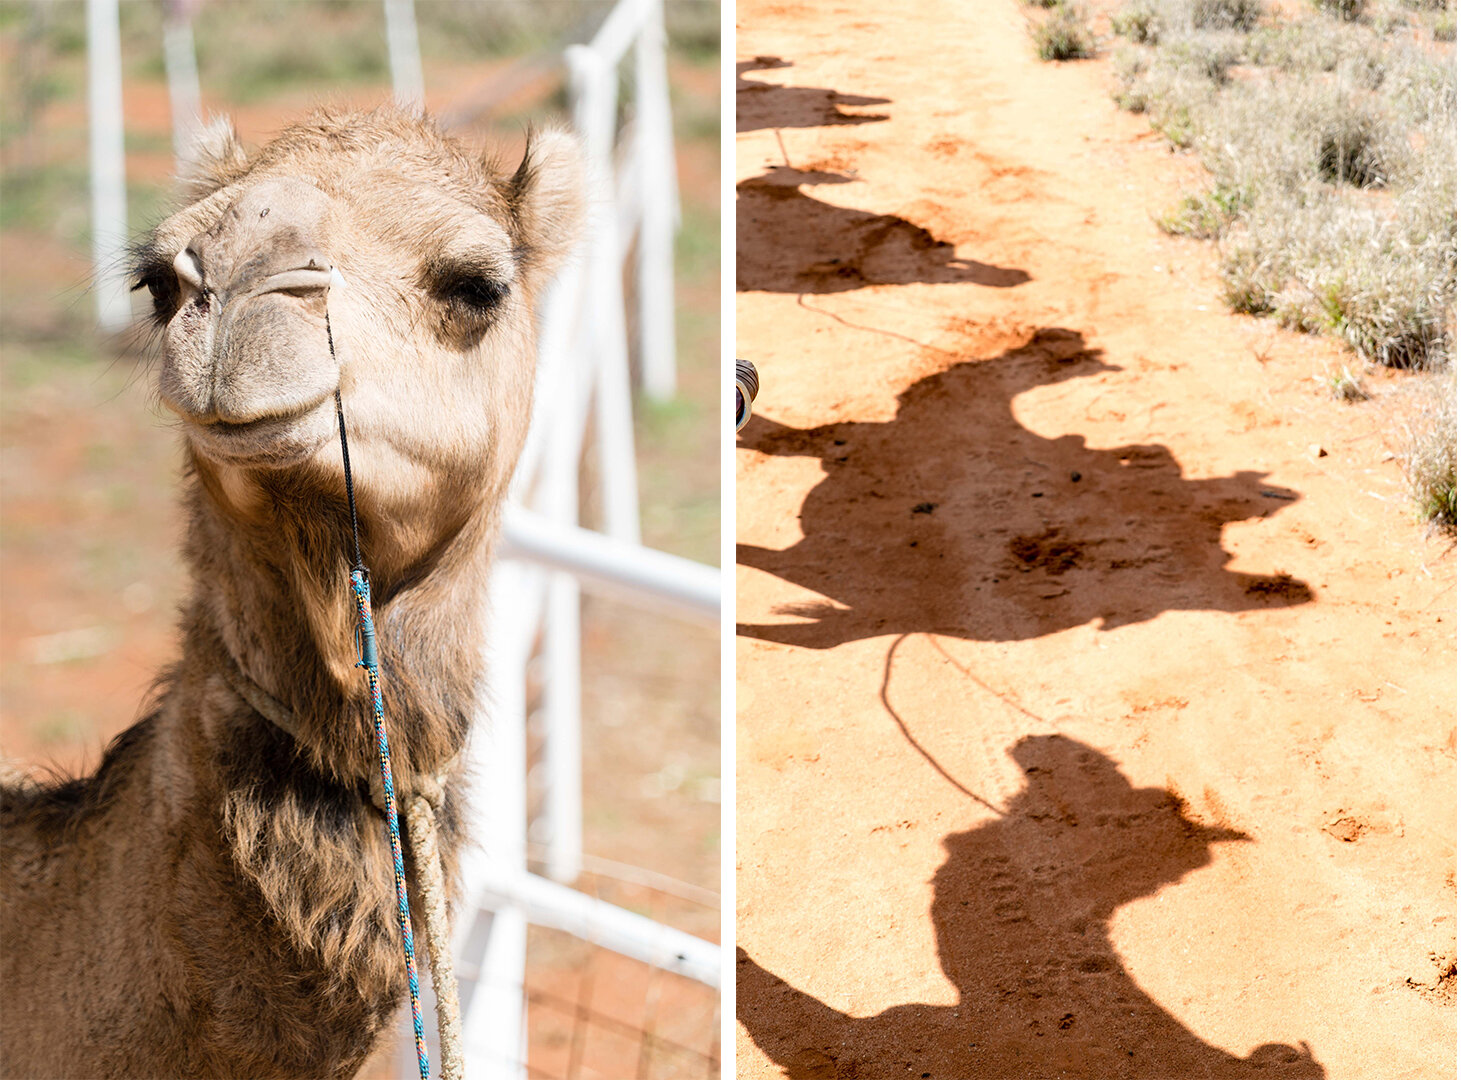 Two photos of camels - one close up and one shadow